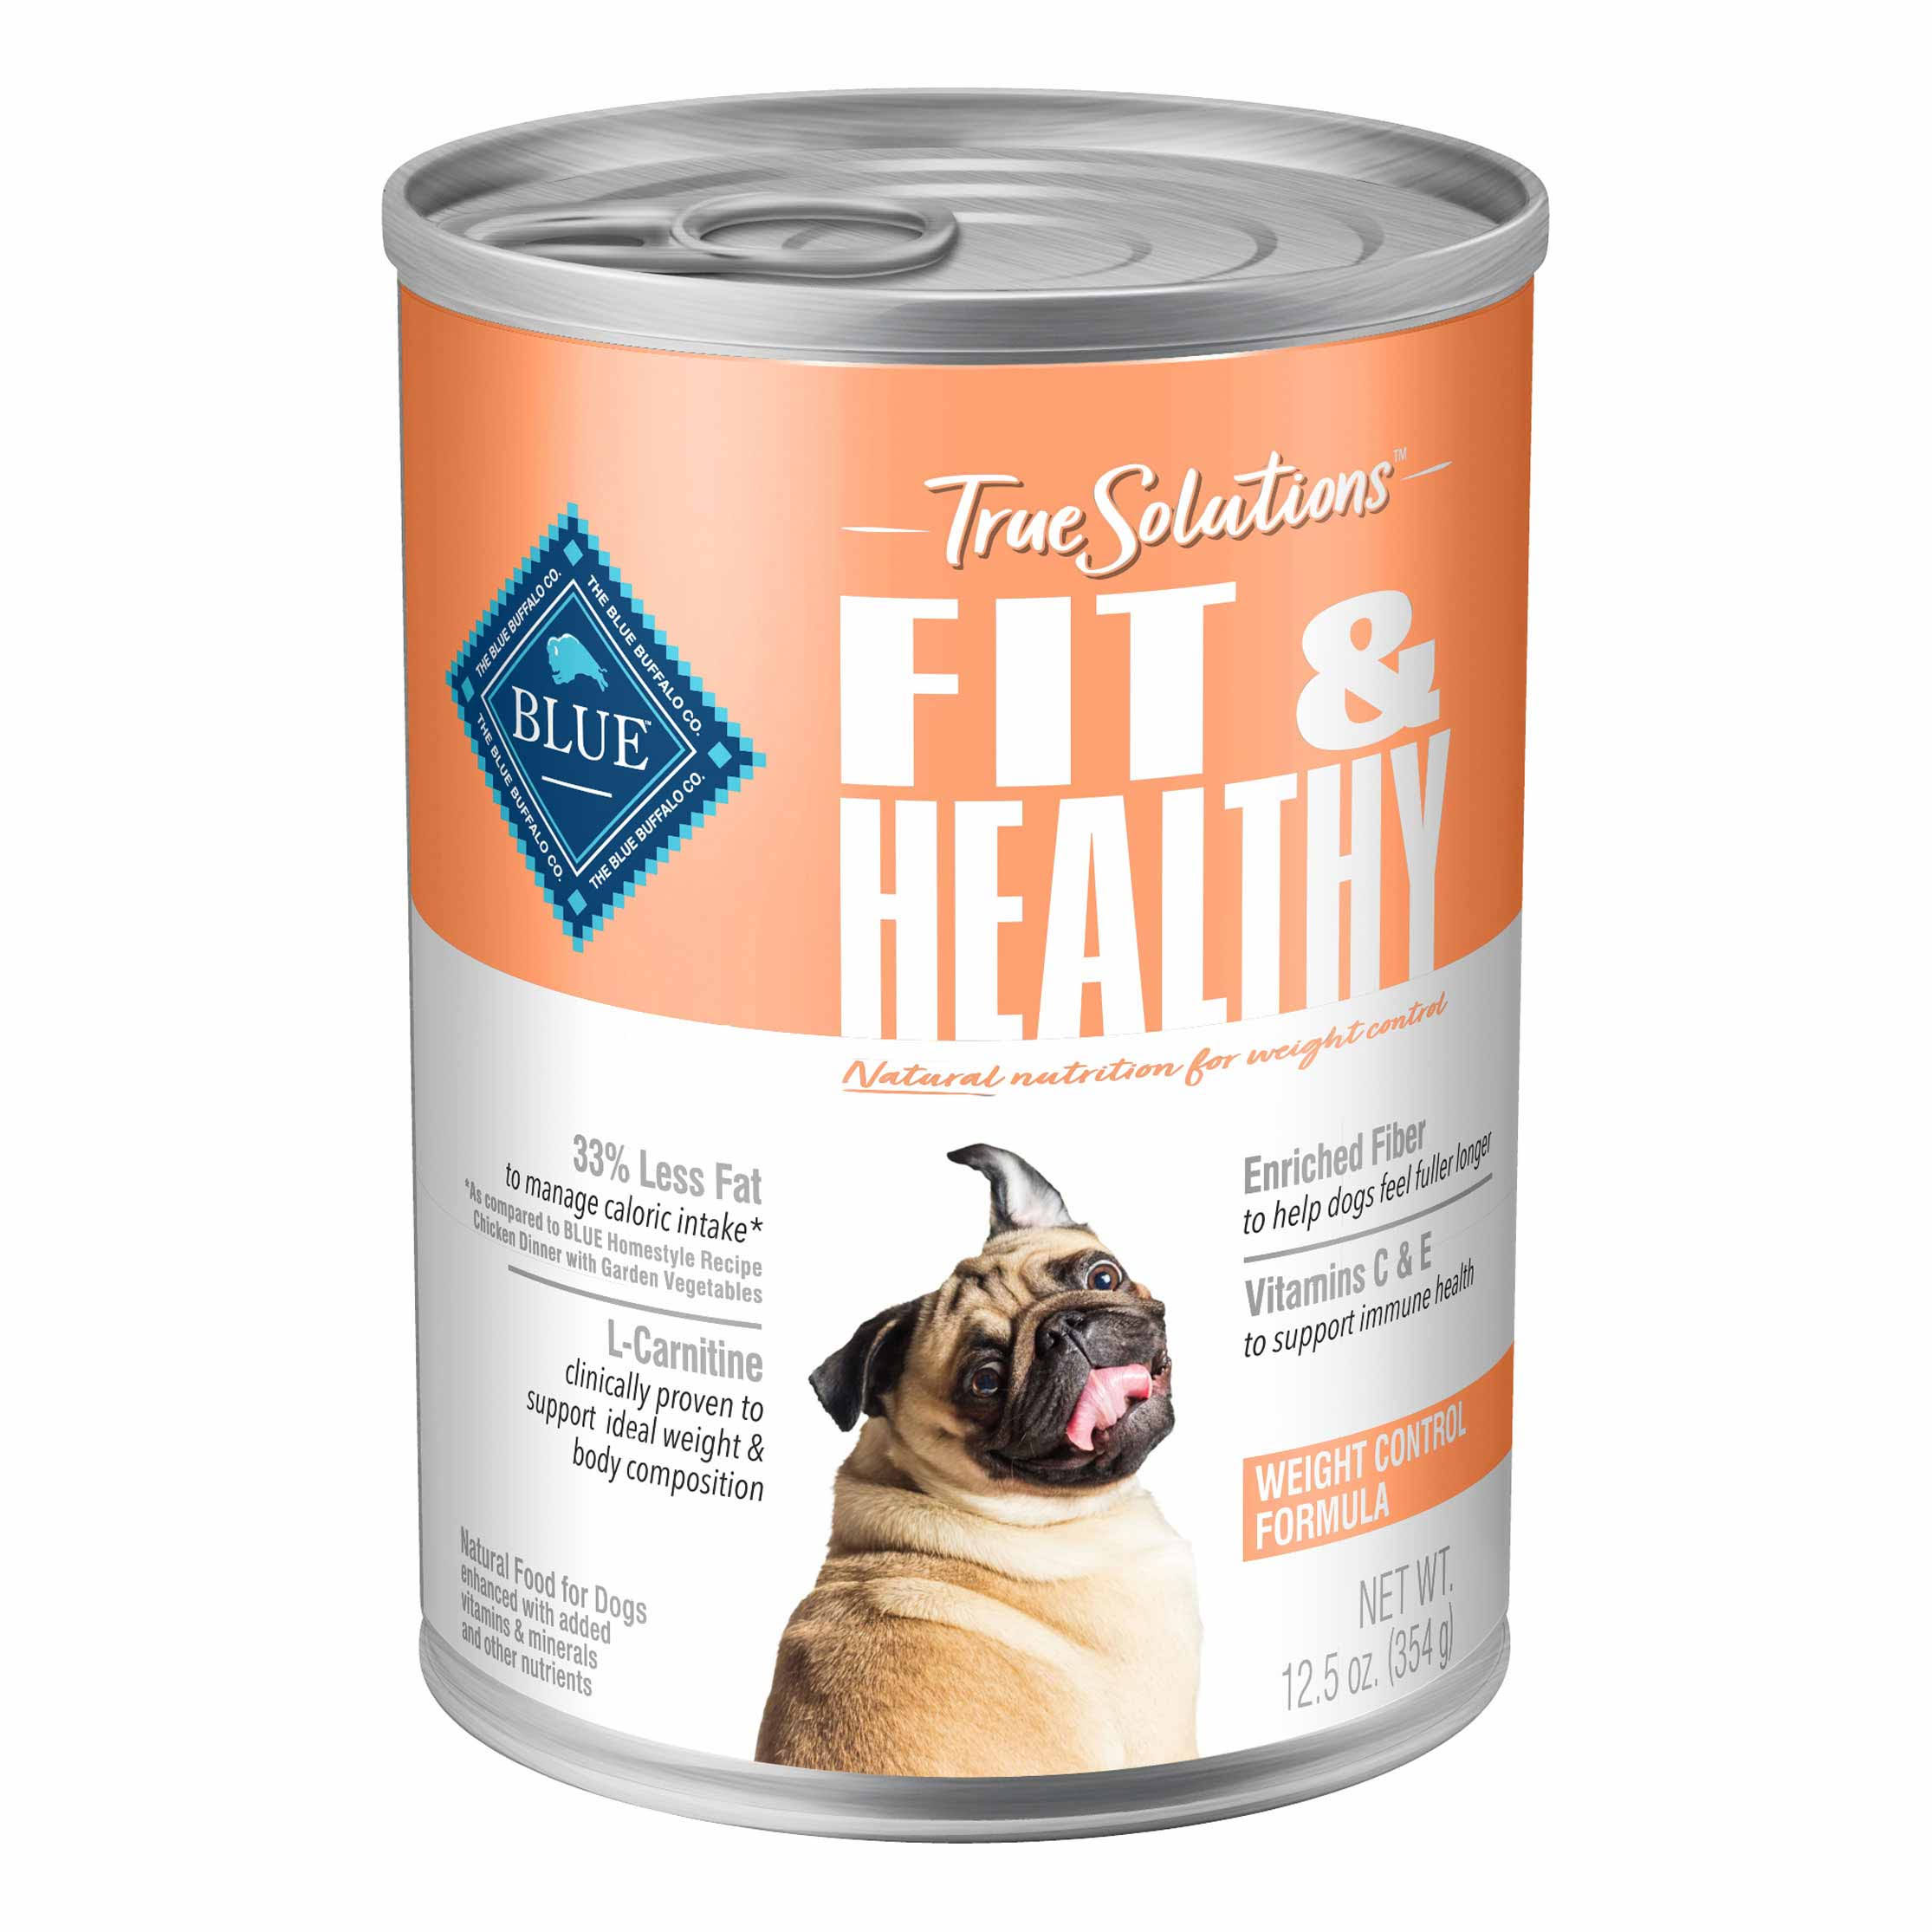 Blue Buffalo Blue True Solutions Food for Dogs, Fit & Healthy - 12.5 oz